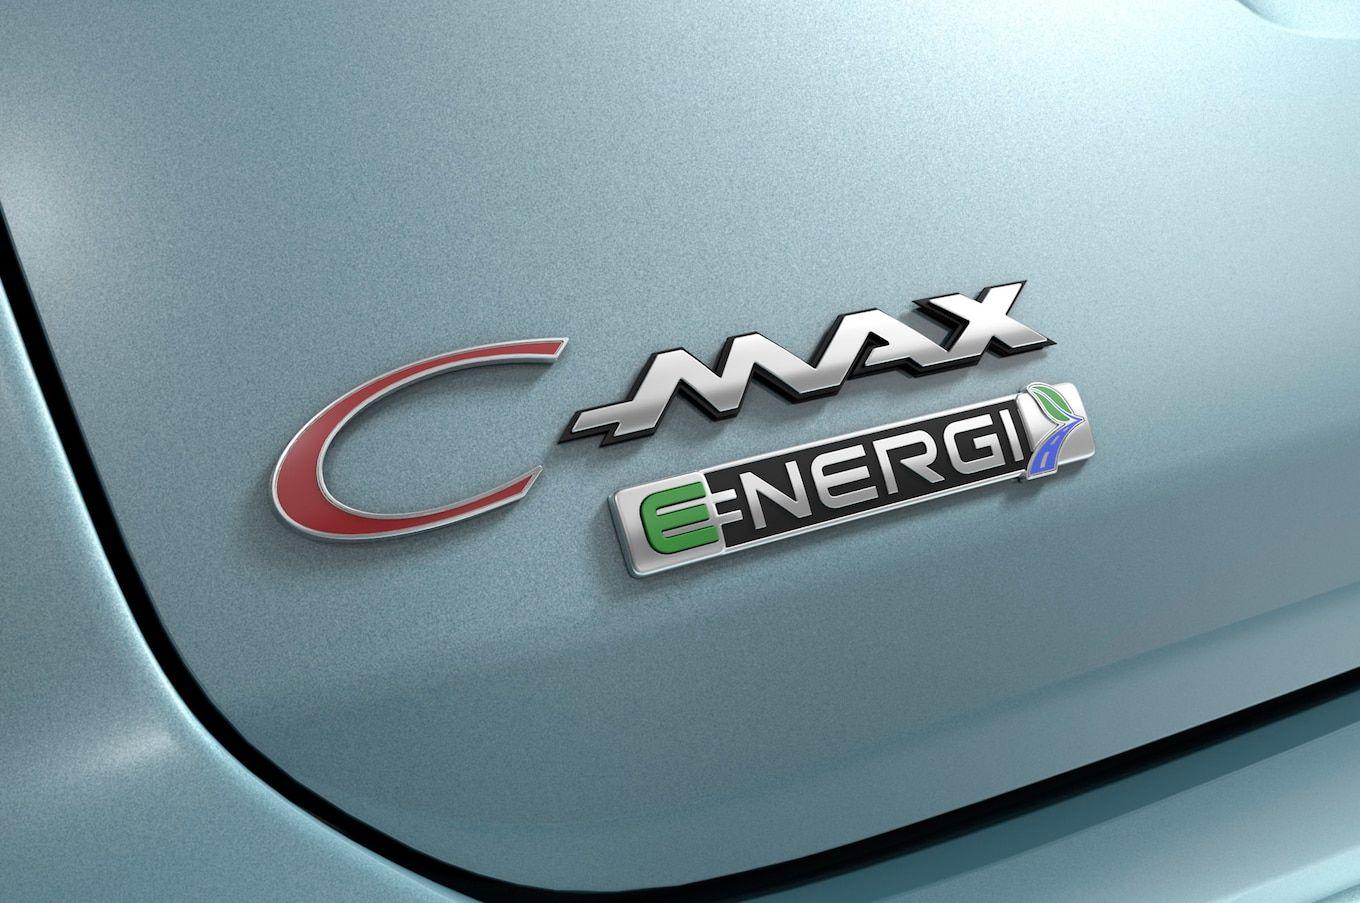 Ford C-Max Logo - 2015 Ford C-MAX Energi Reviews and Rating | Motortrend